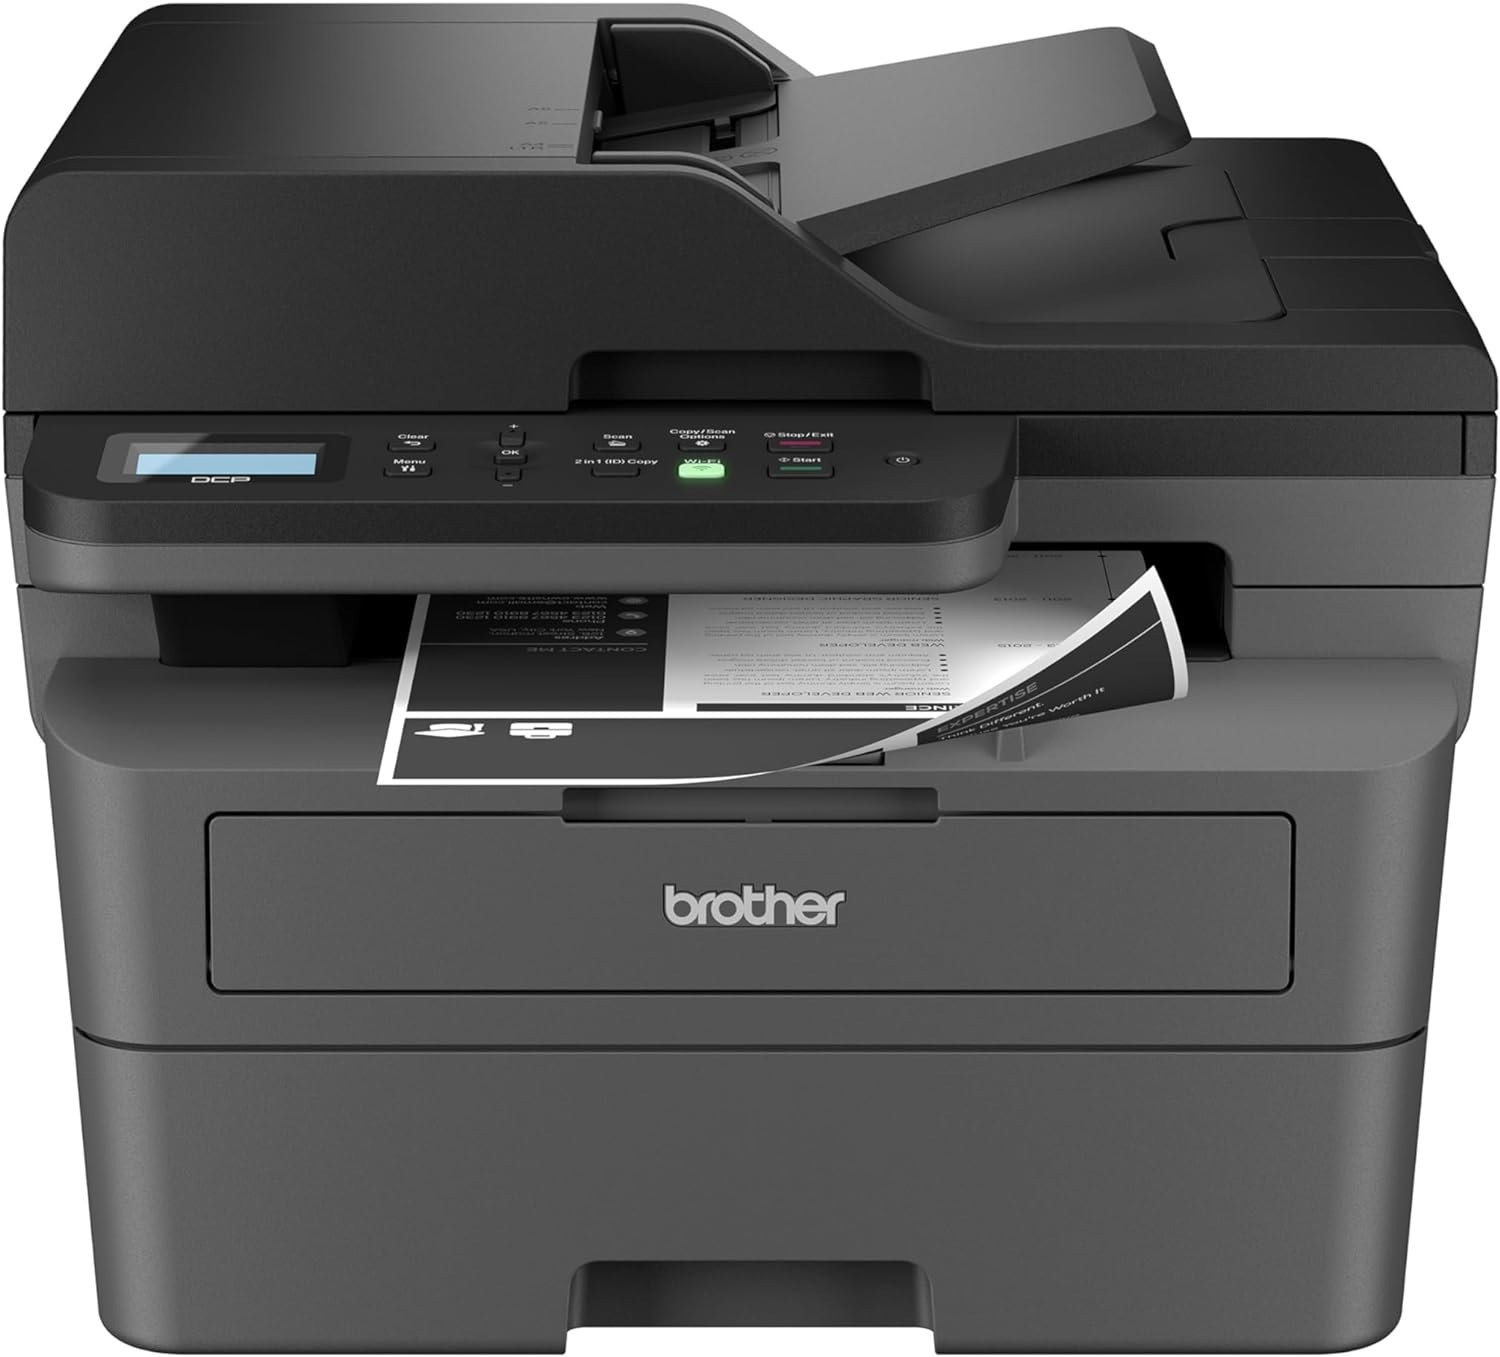 Brother DCP-L2640DW Wireless Compact Monochrome Multi-Function Laser Printer